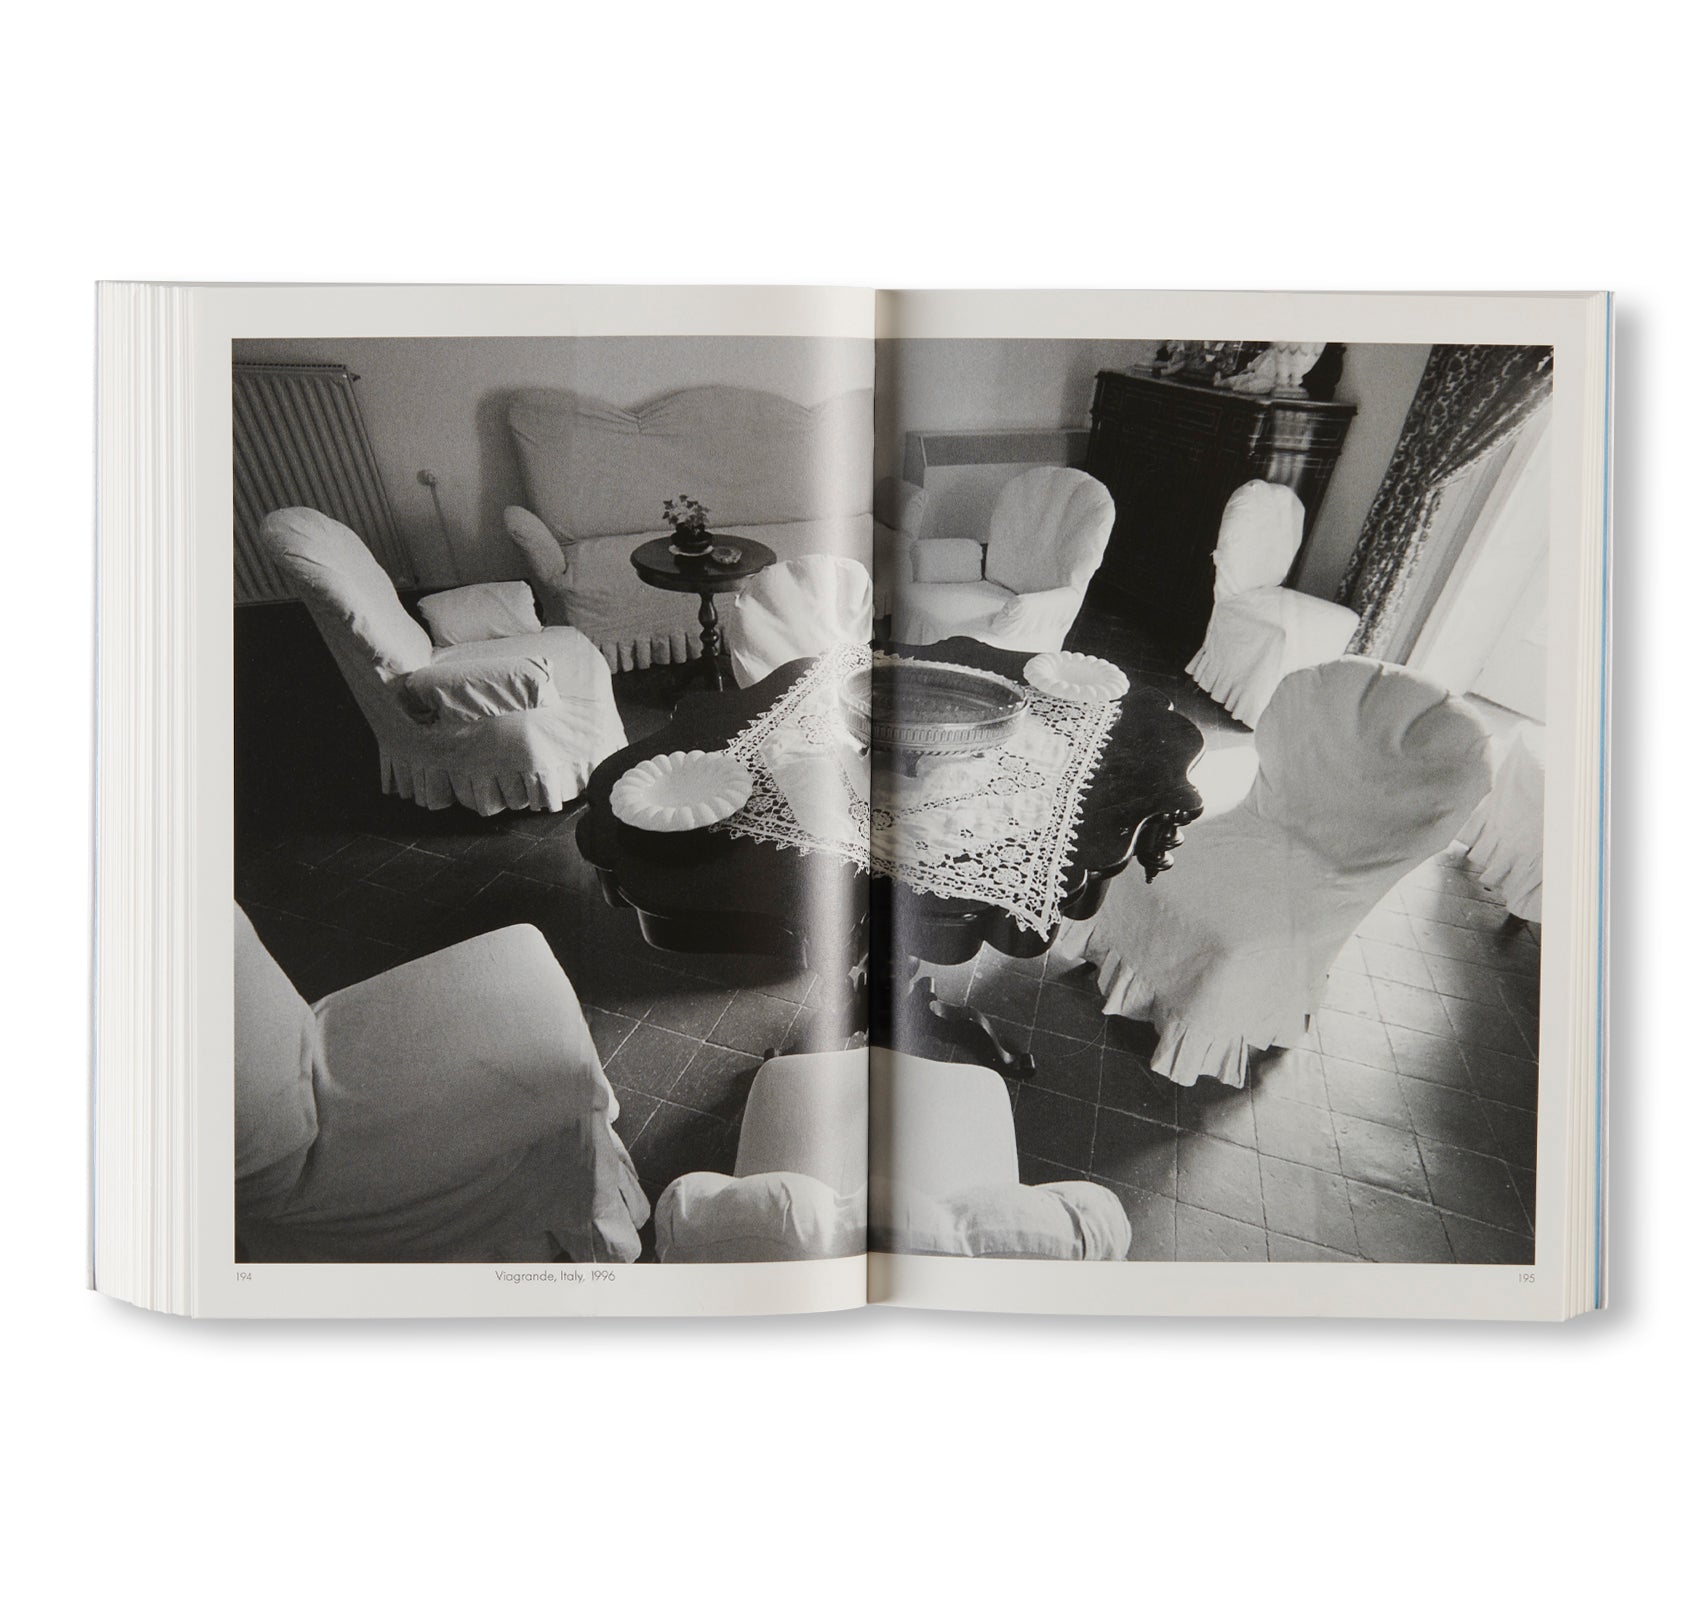 THERE IS A PLANET. TEXTS AND PHOTOGRAPHS by Ettore Sottsass